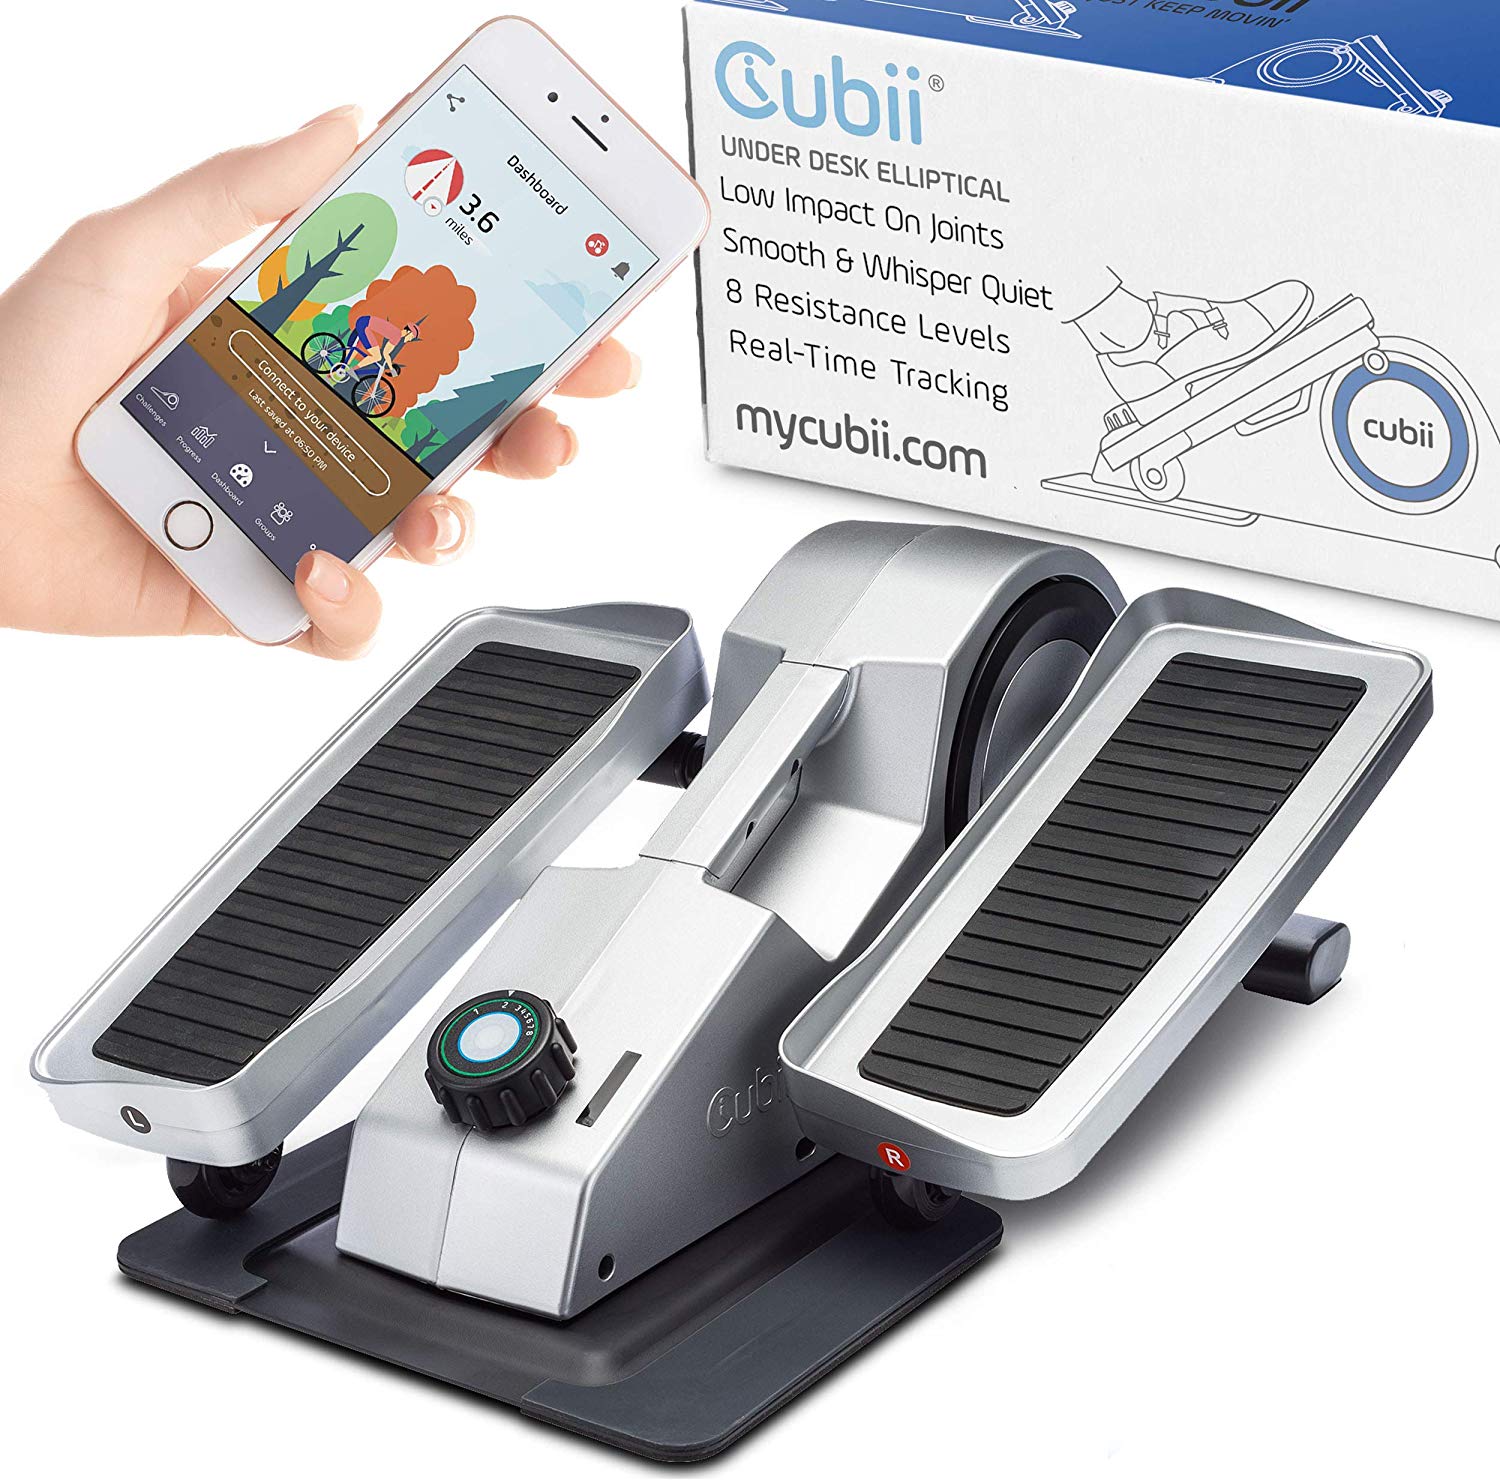 Cubii Elliptical - Pro Model With Bluetooth and Fitness App